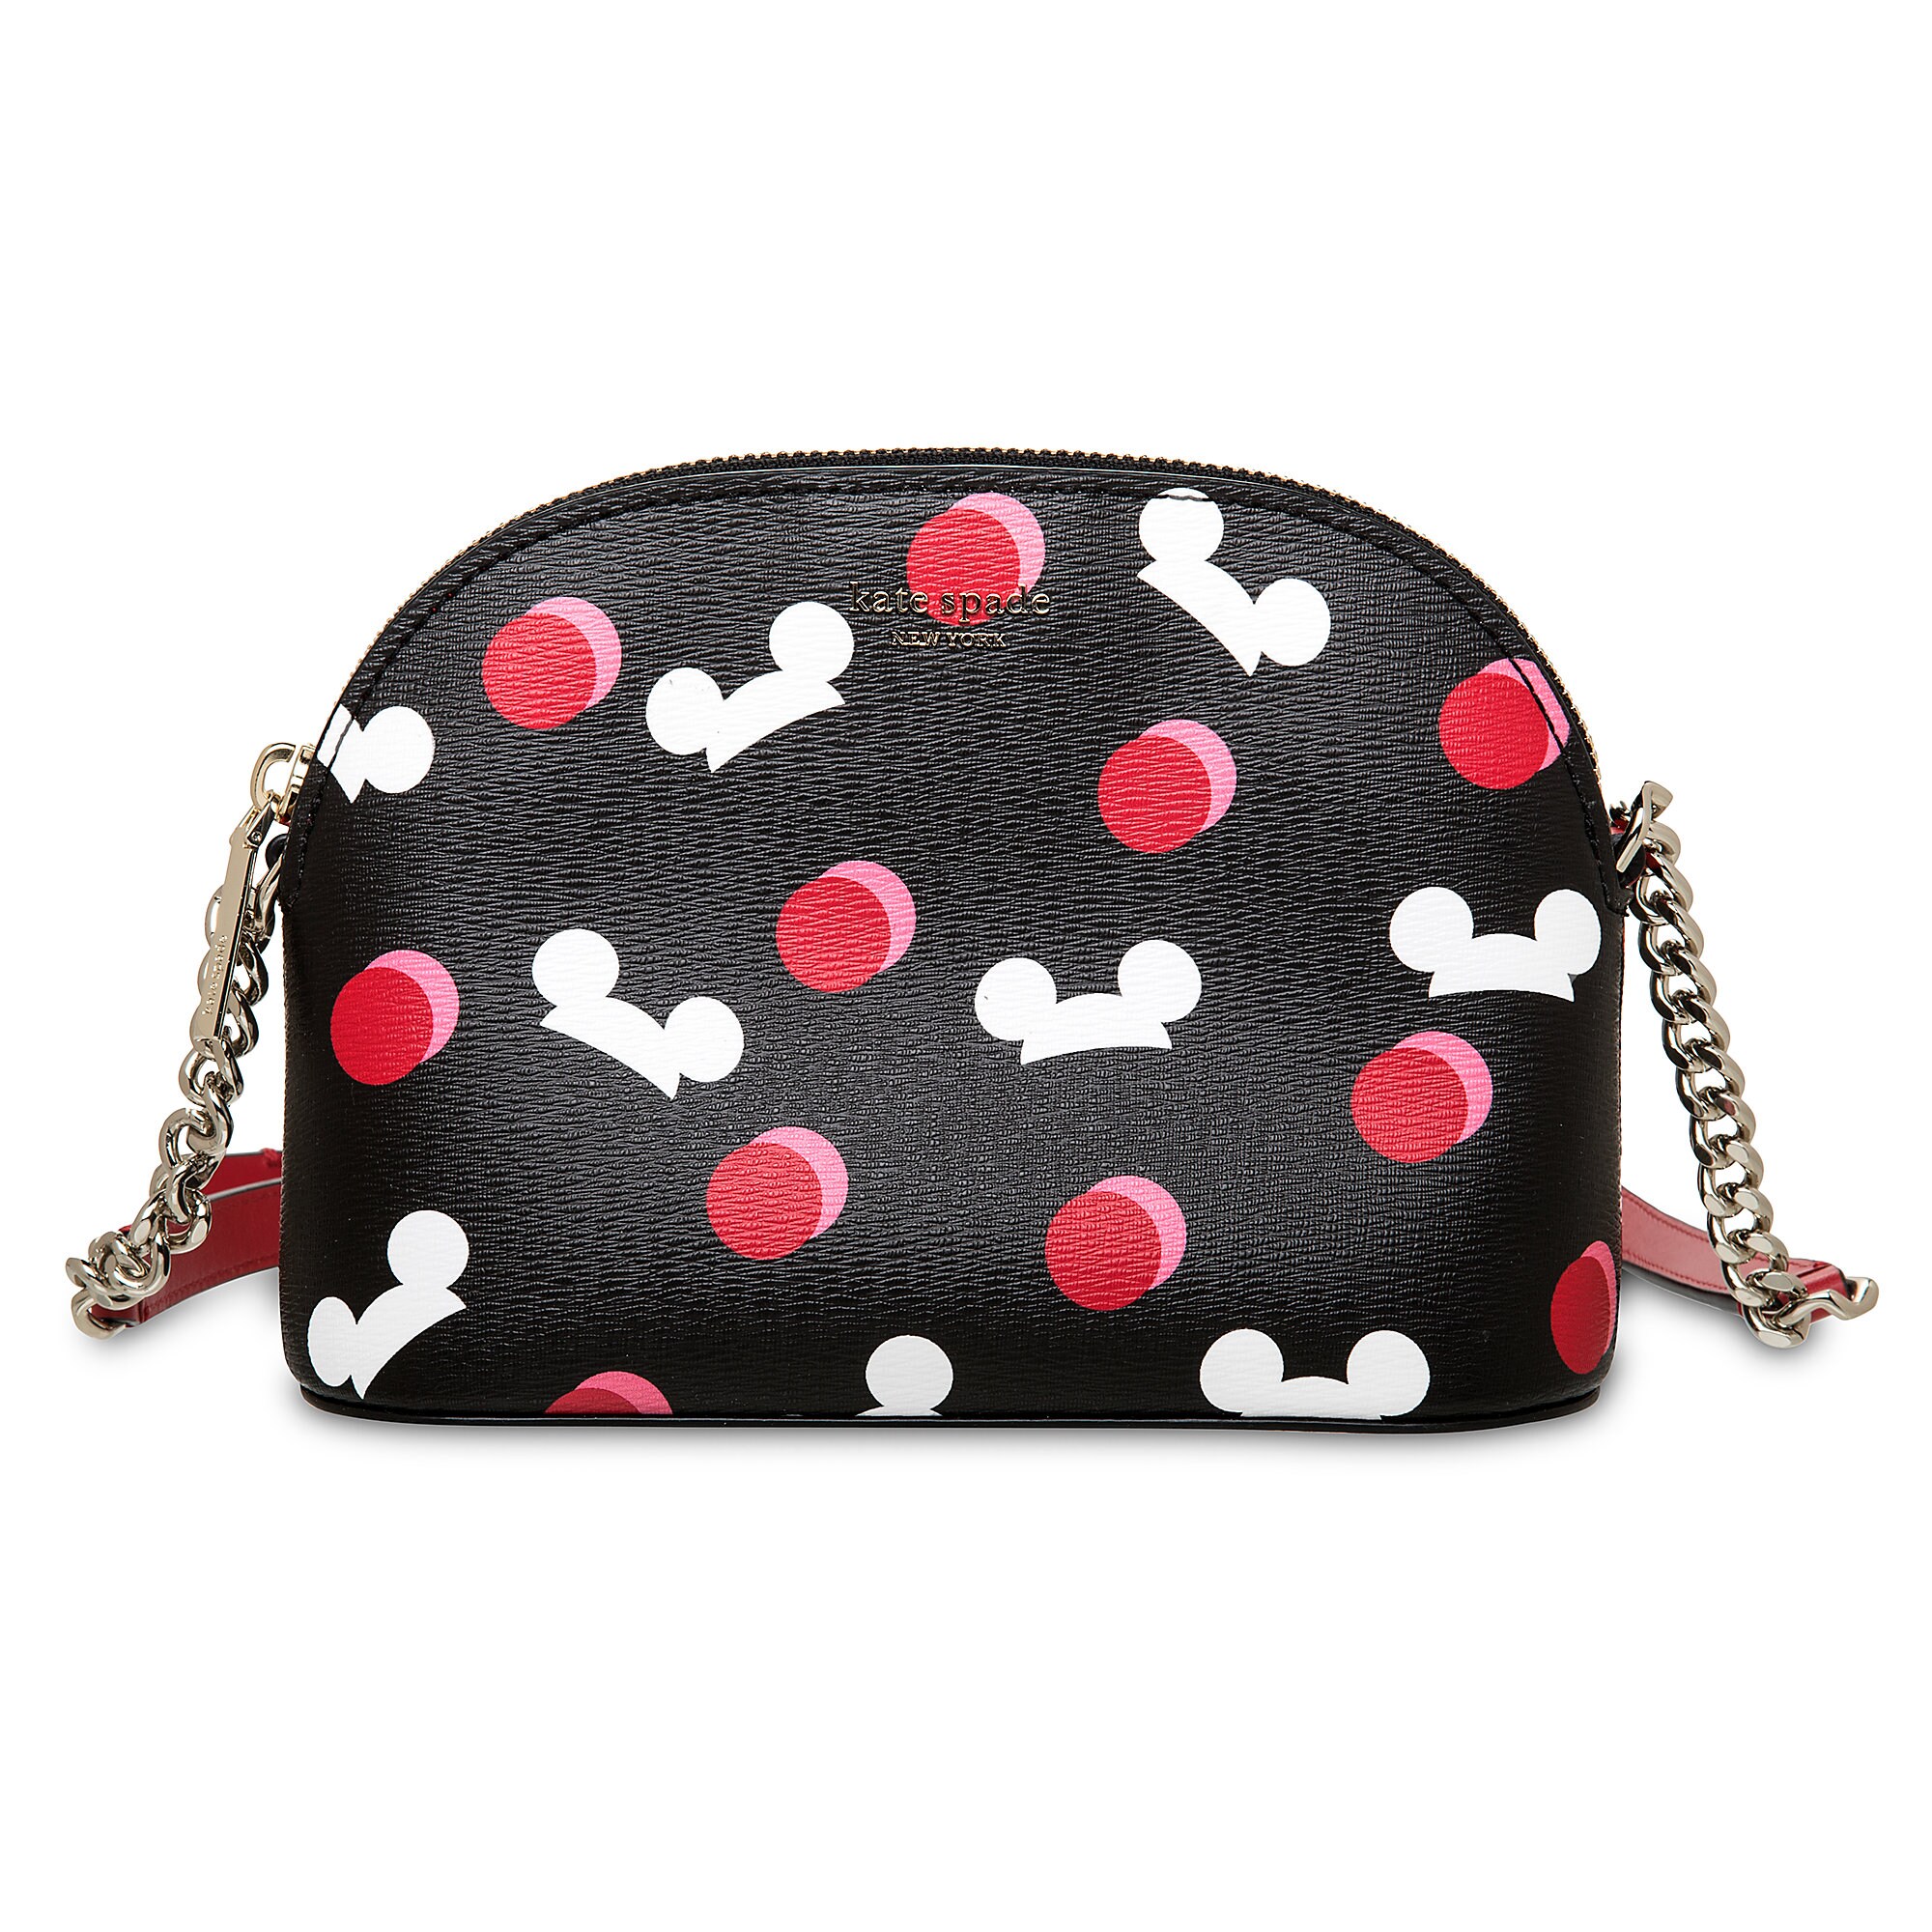 Mickey Mouse Ear Hat Crossbody by kate spade new york - Black